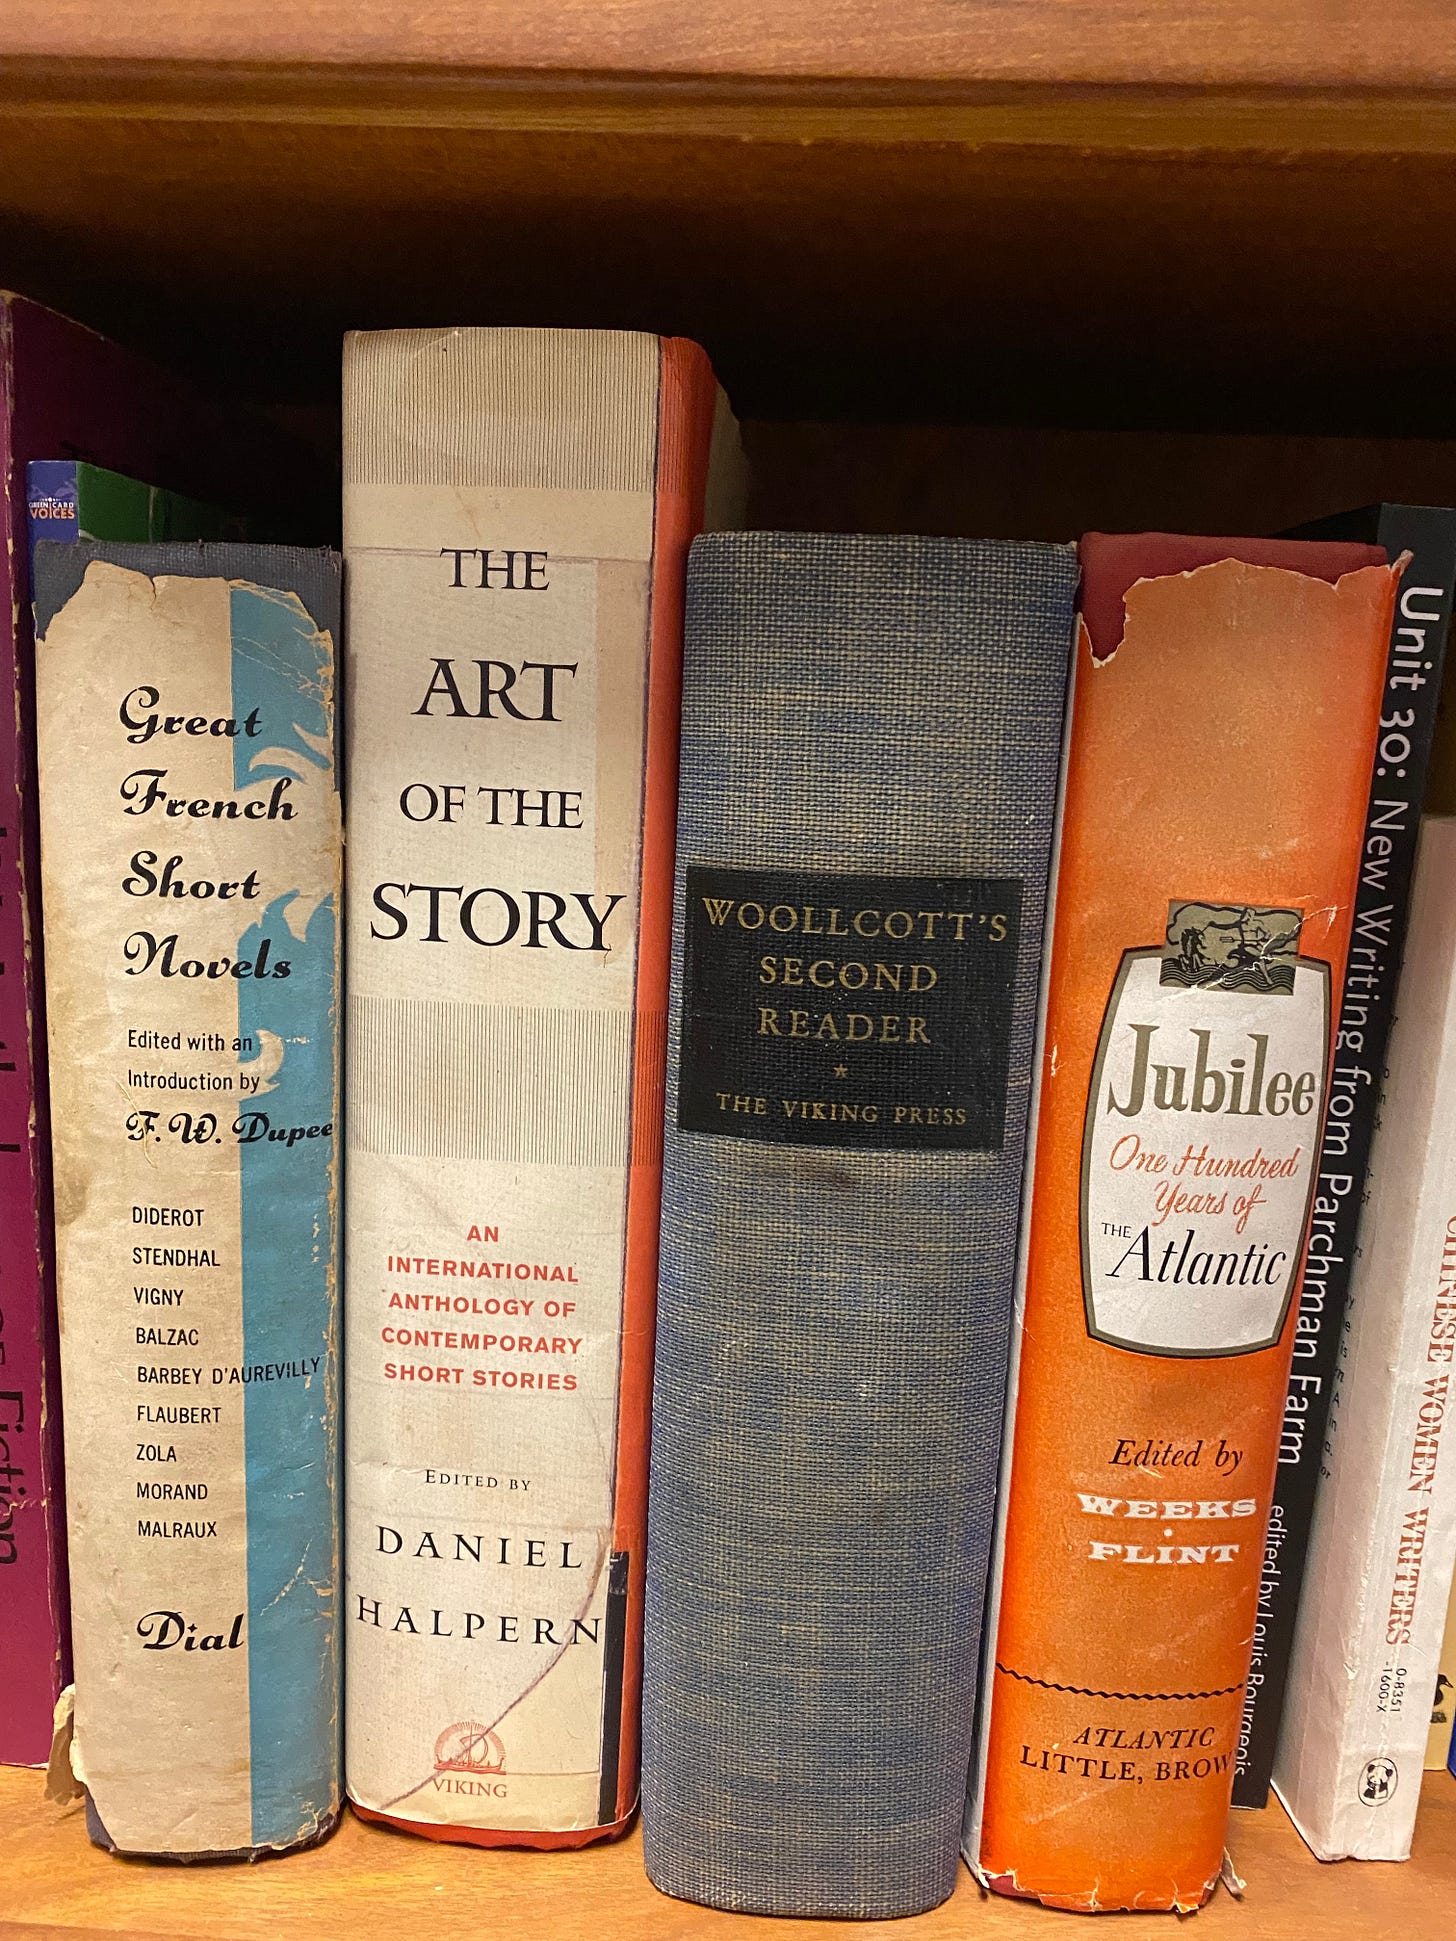 Spines of 5 and a half literature anthologies, including Woollcott's Second Reader, Great French Short Novels, The Art of the Story, and Jubilee: One hundred Years of the Atlantic